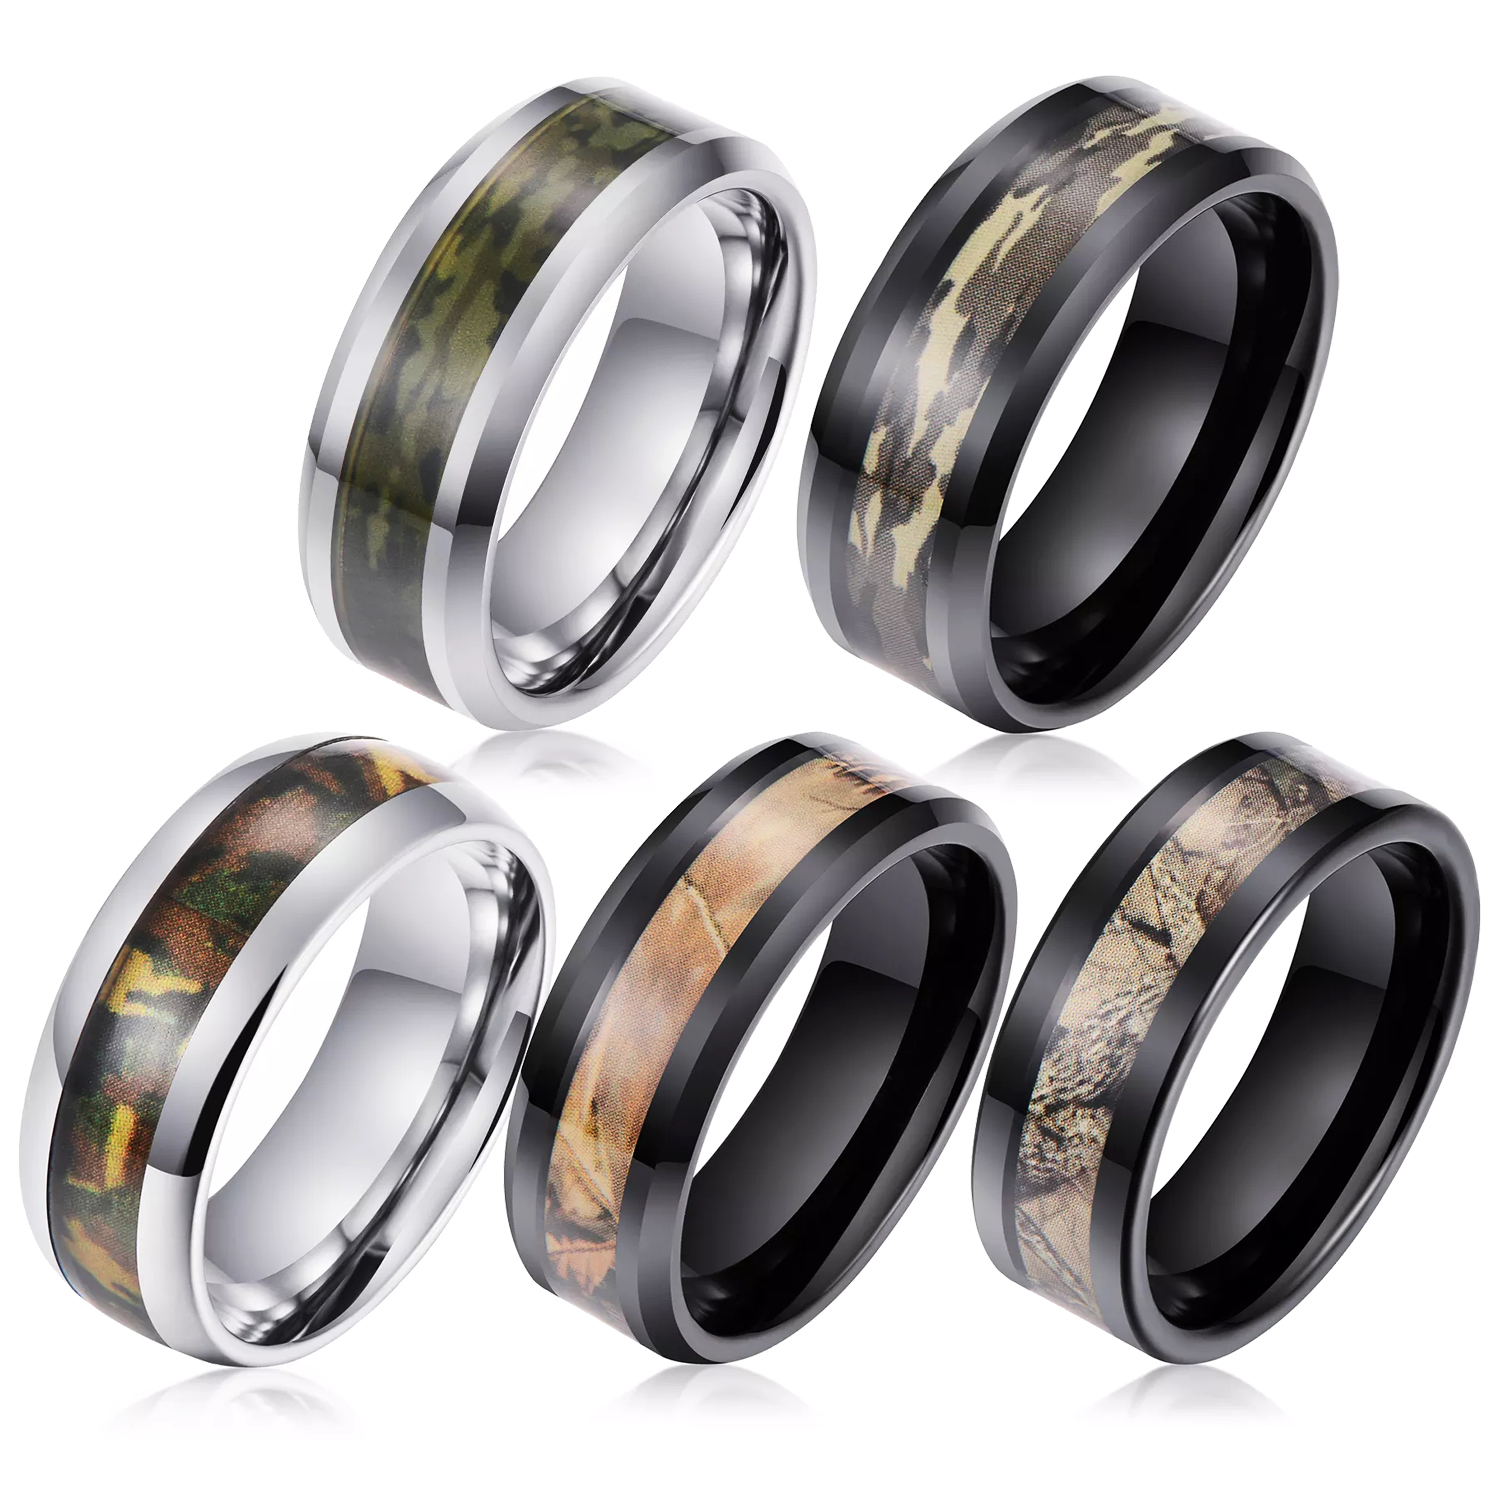 Green Camouflage Fashion Jewelry Party High Quality Tungsten Carbide Steel Ring For Men Featured Image